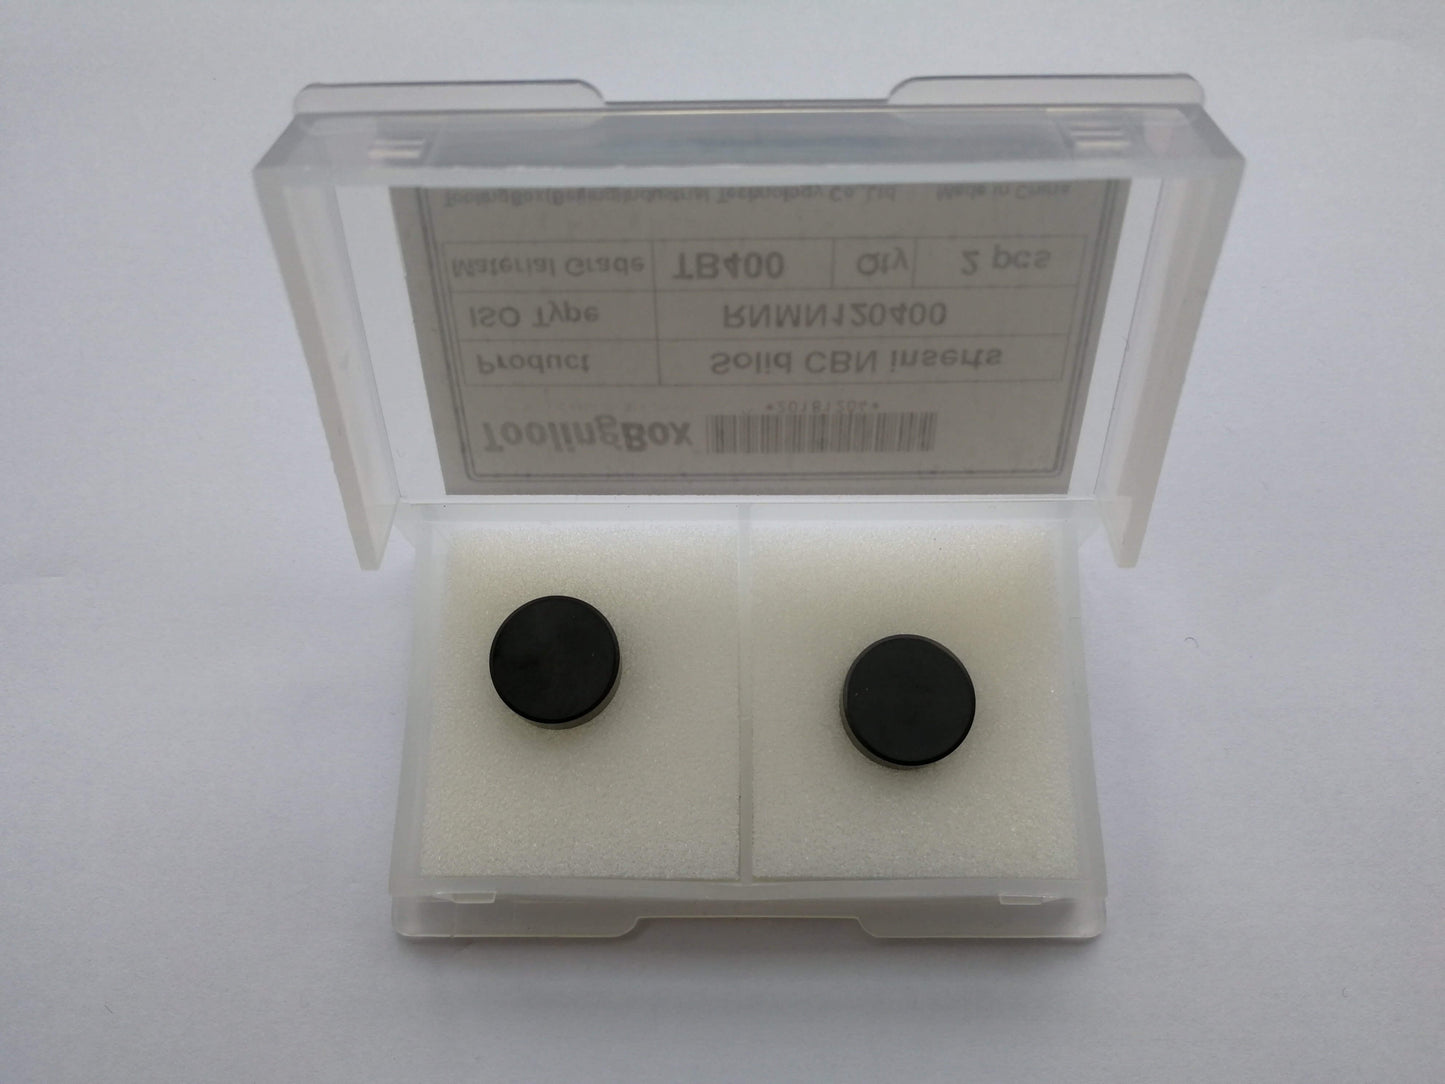 2 pcs packing Solid CBN insert RNMN090300 TB200 for hard turning